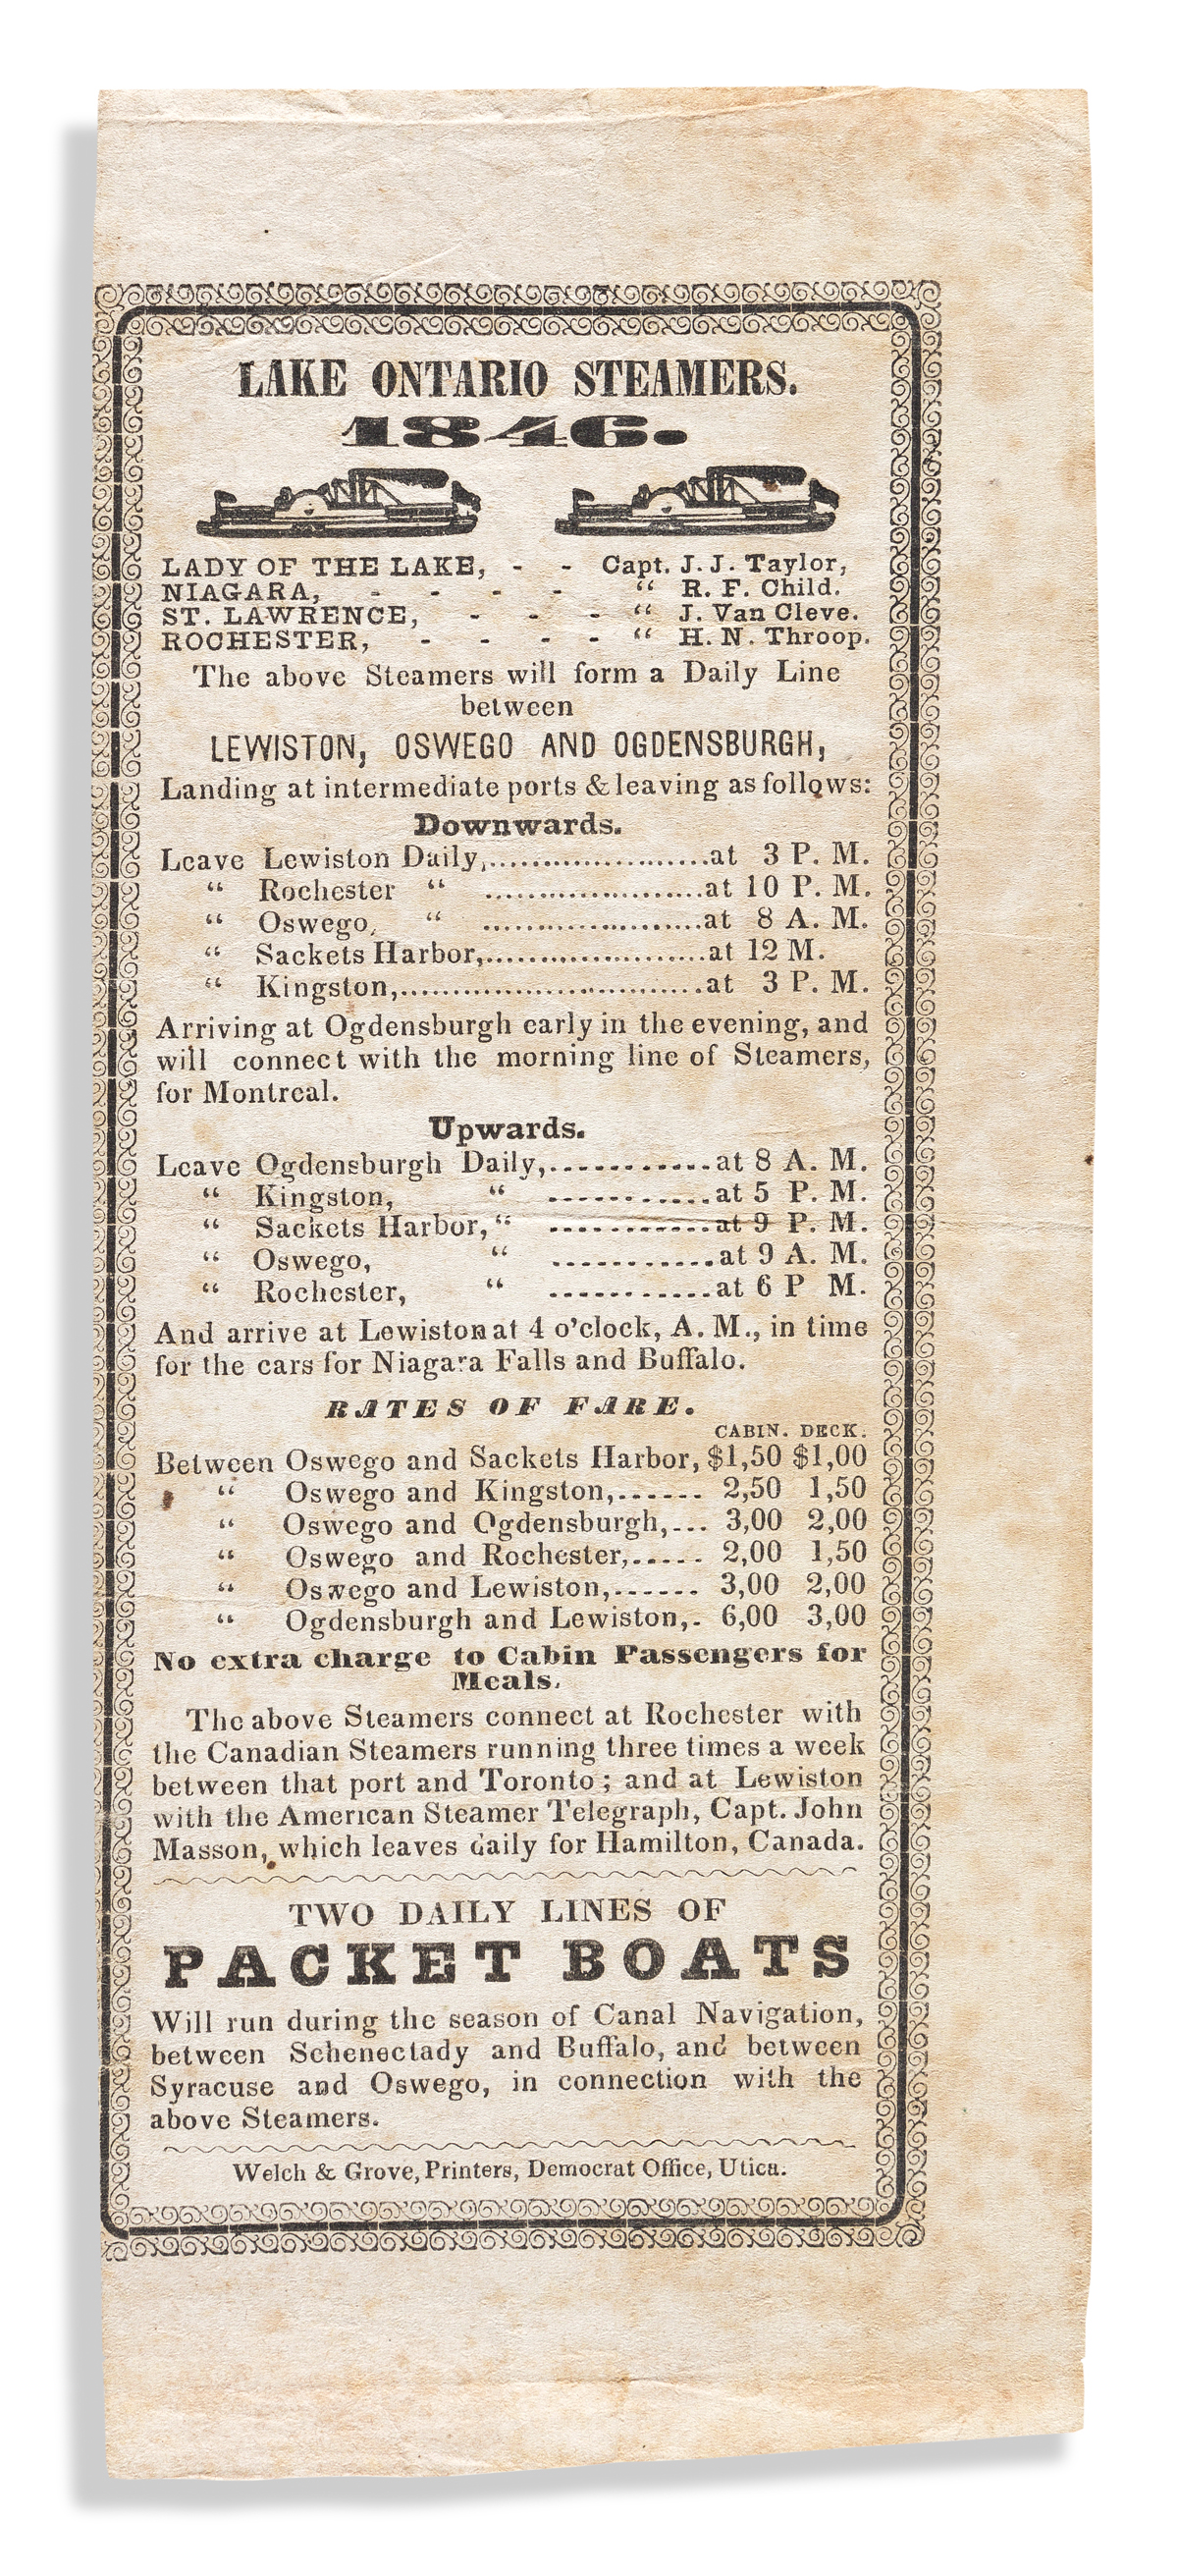 (NEW YORK.) Time-table, fare schedule and information sheet for travel on Lake Ontario in 1846.